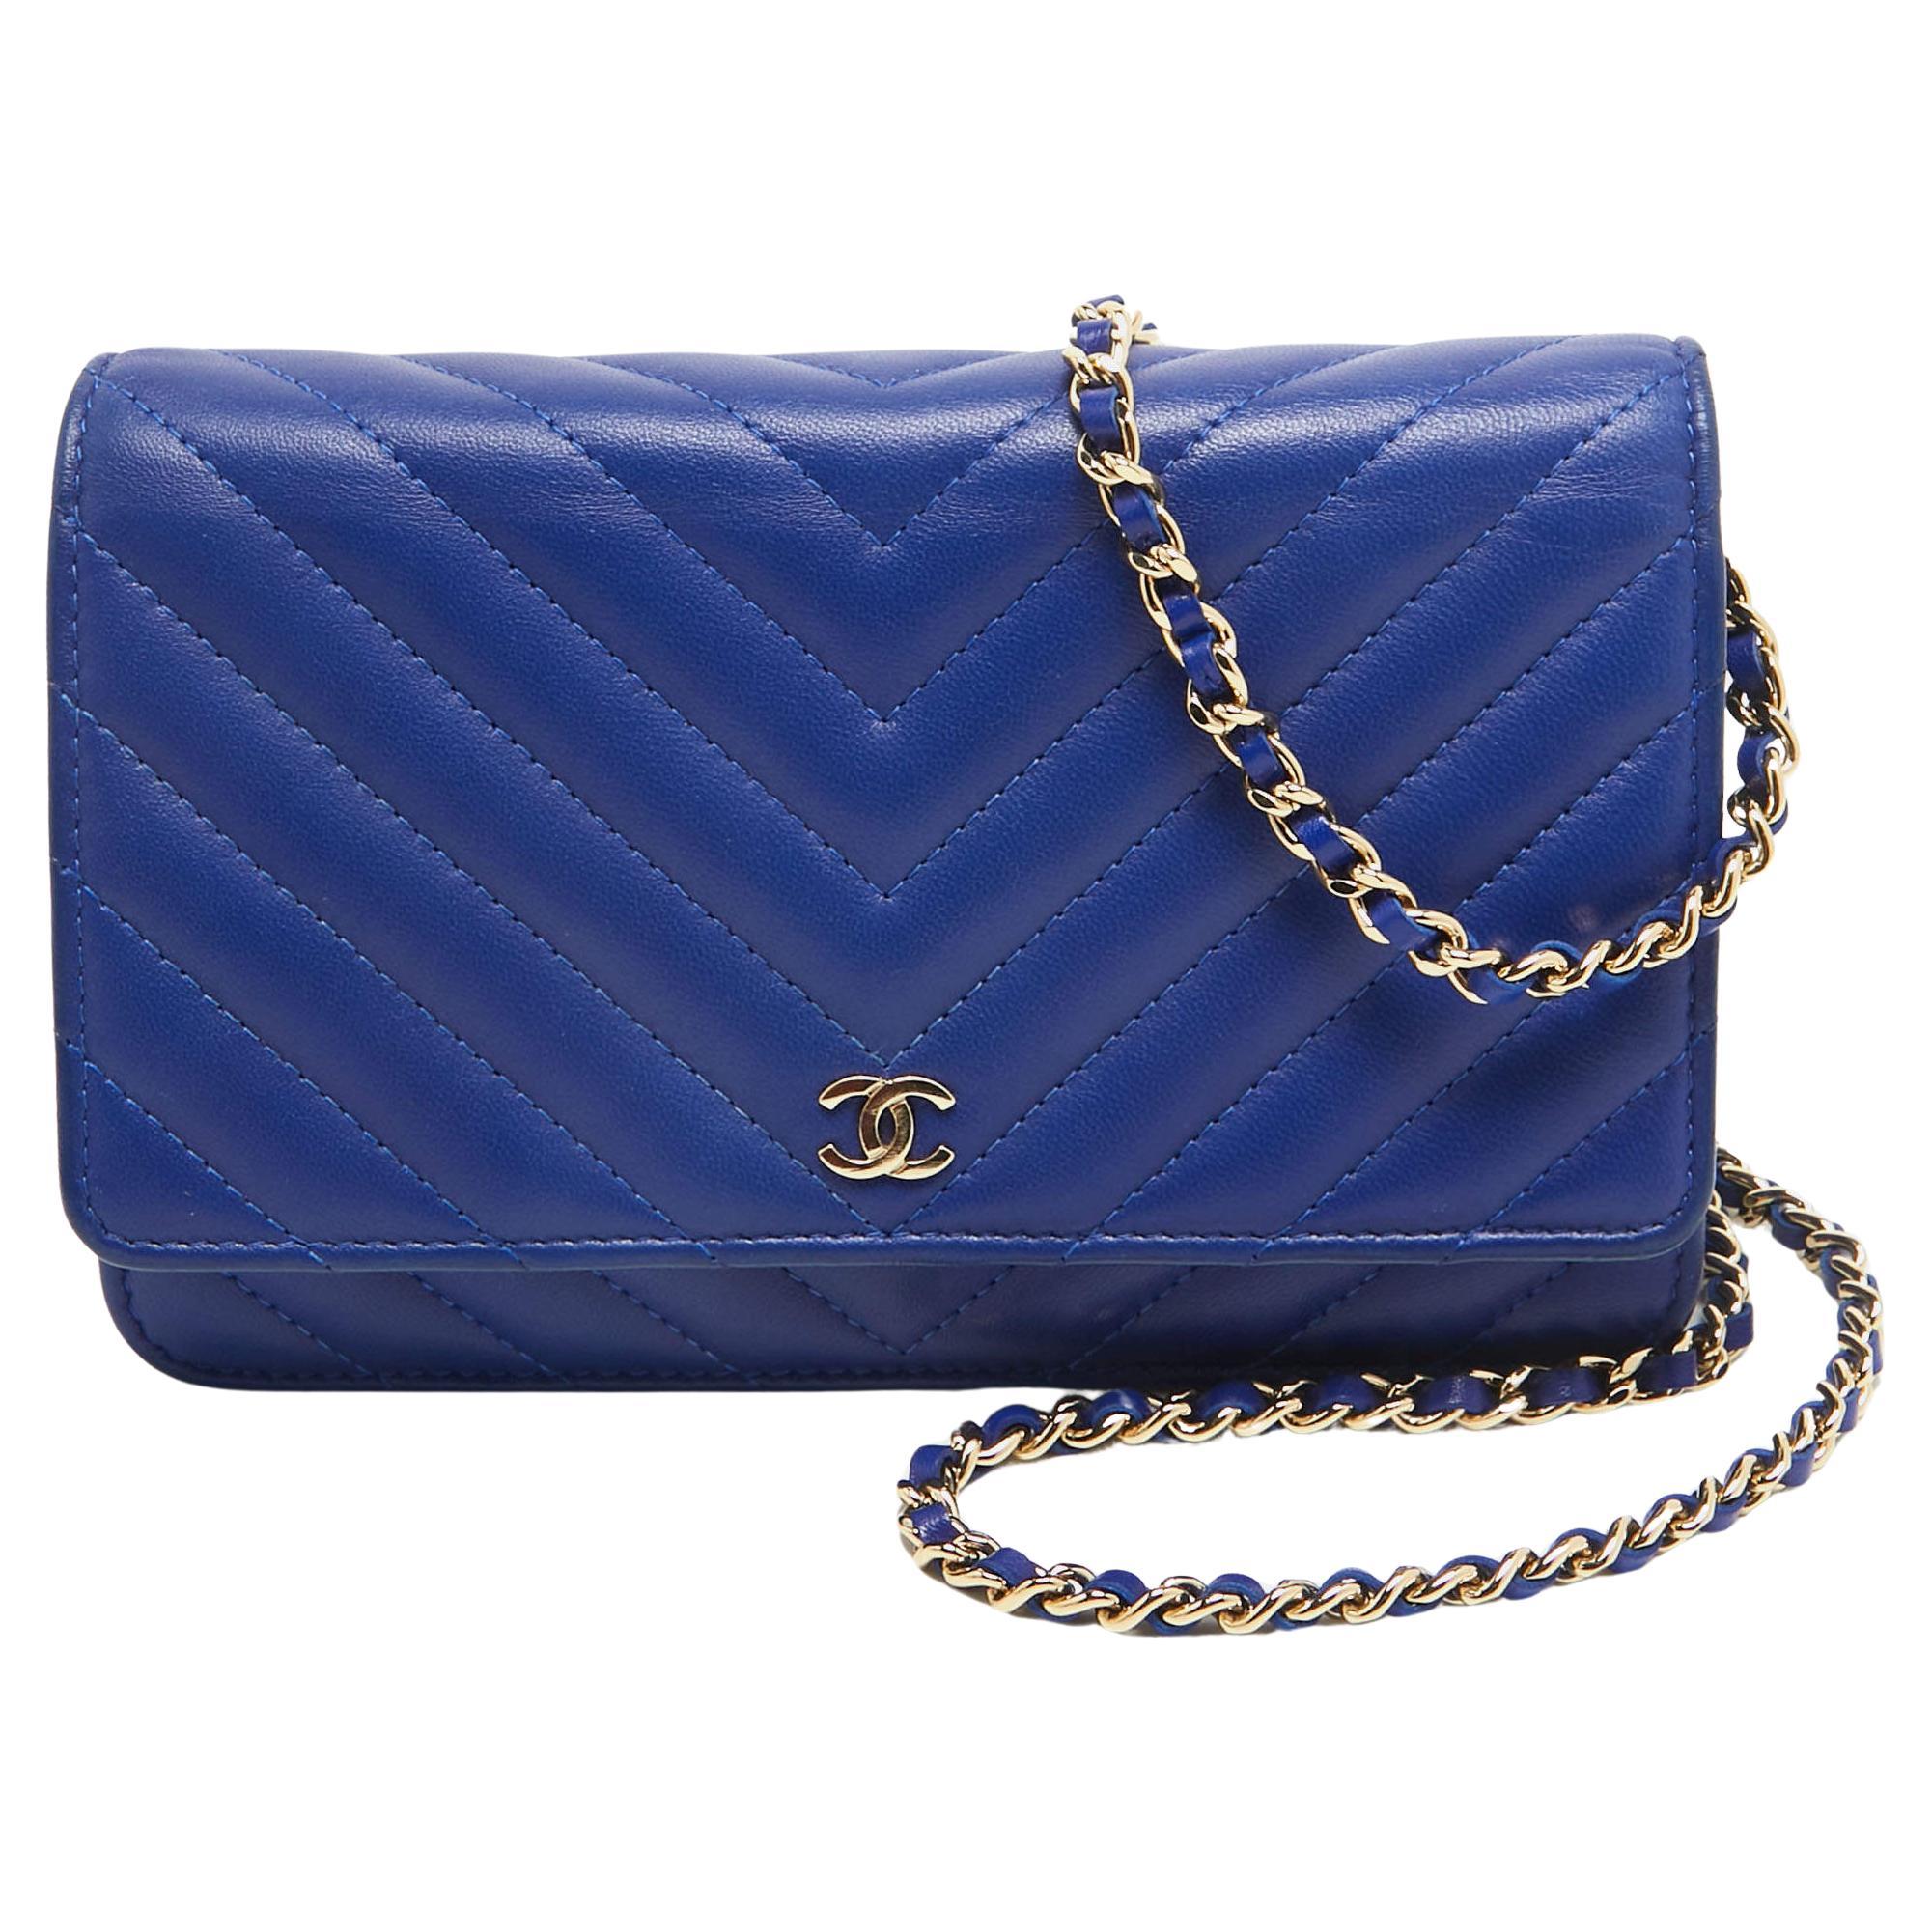 Chanel Blue Chevron Leather Classic Wallet on Chain For Sale